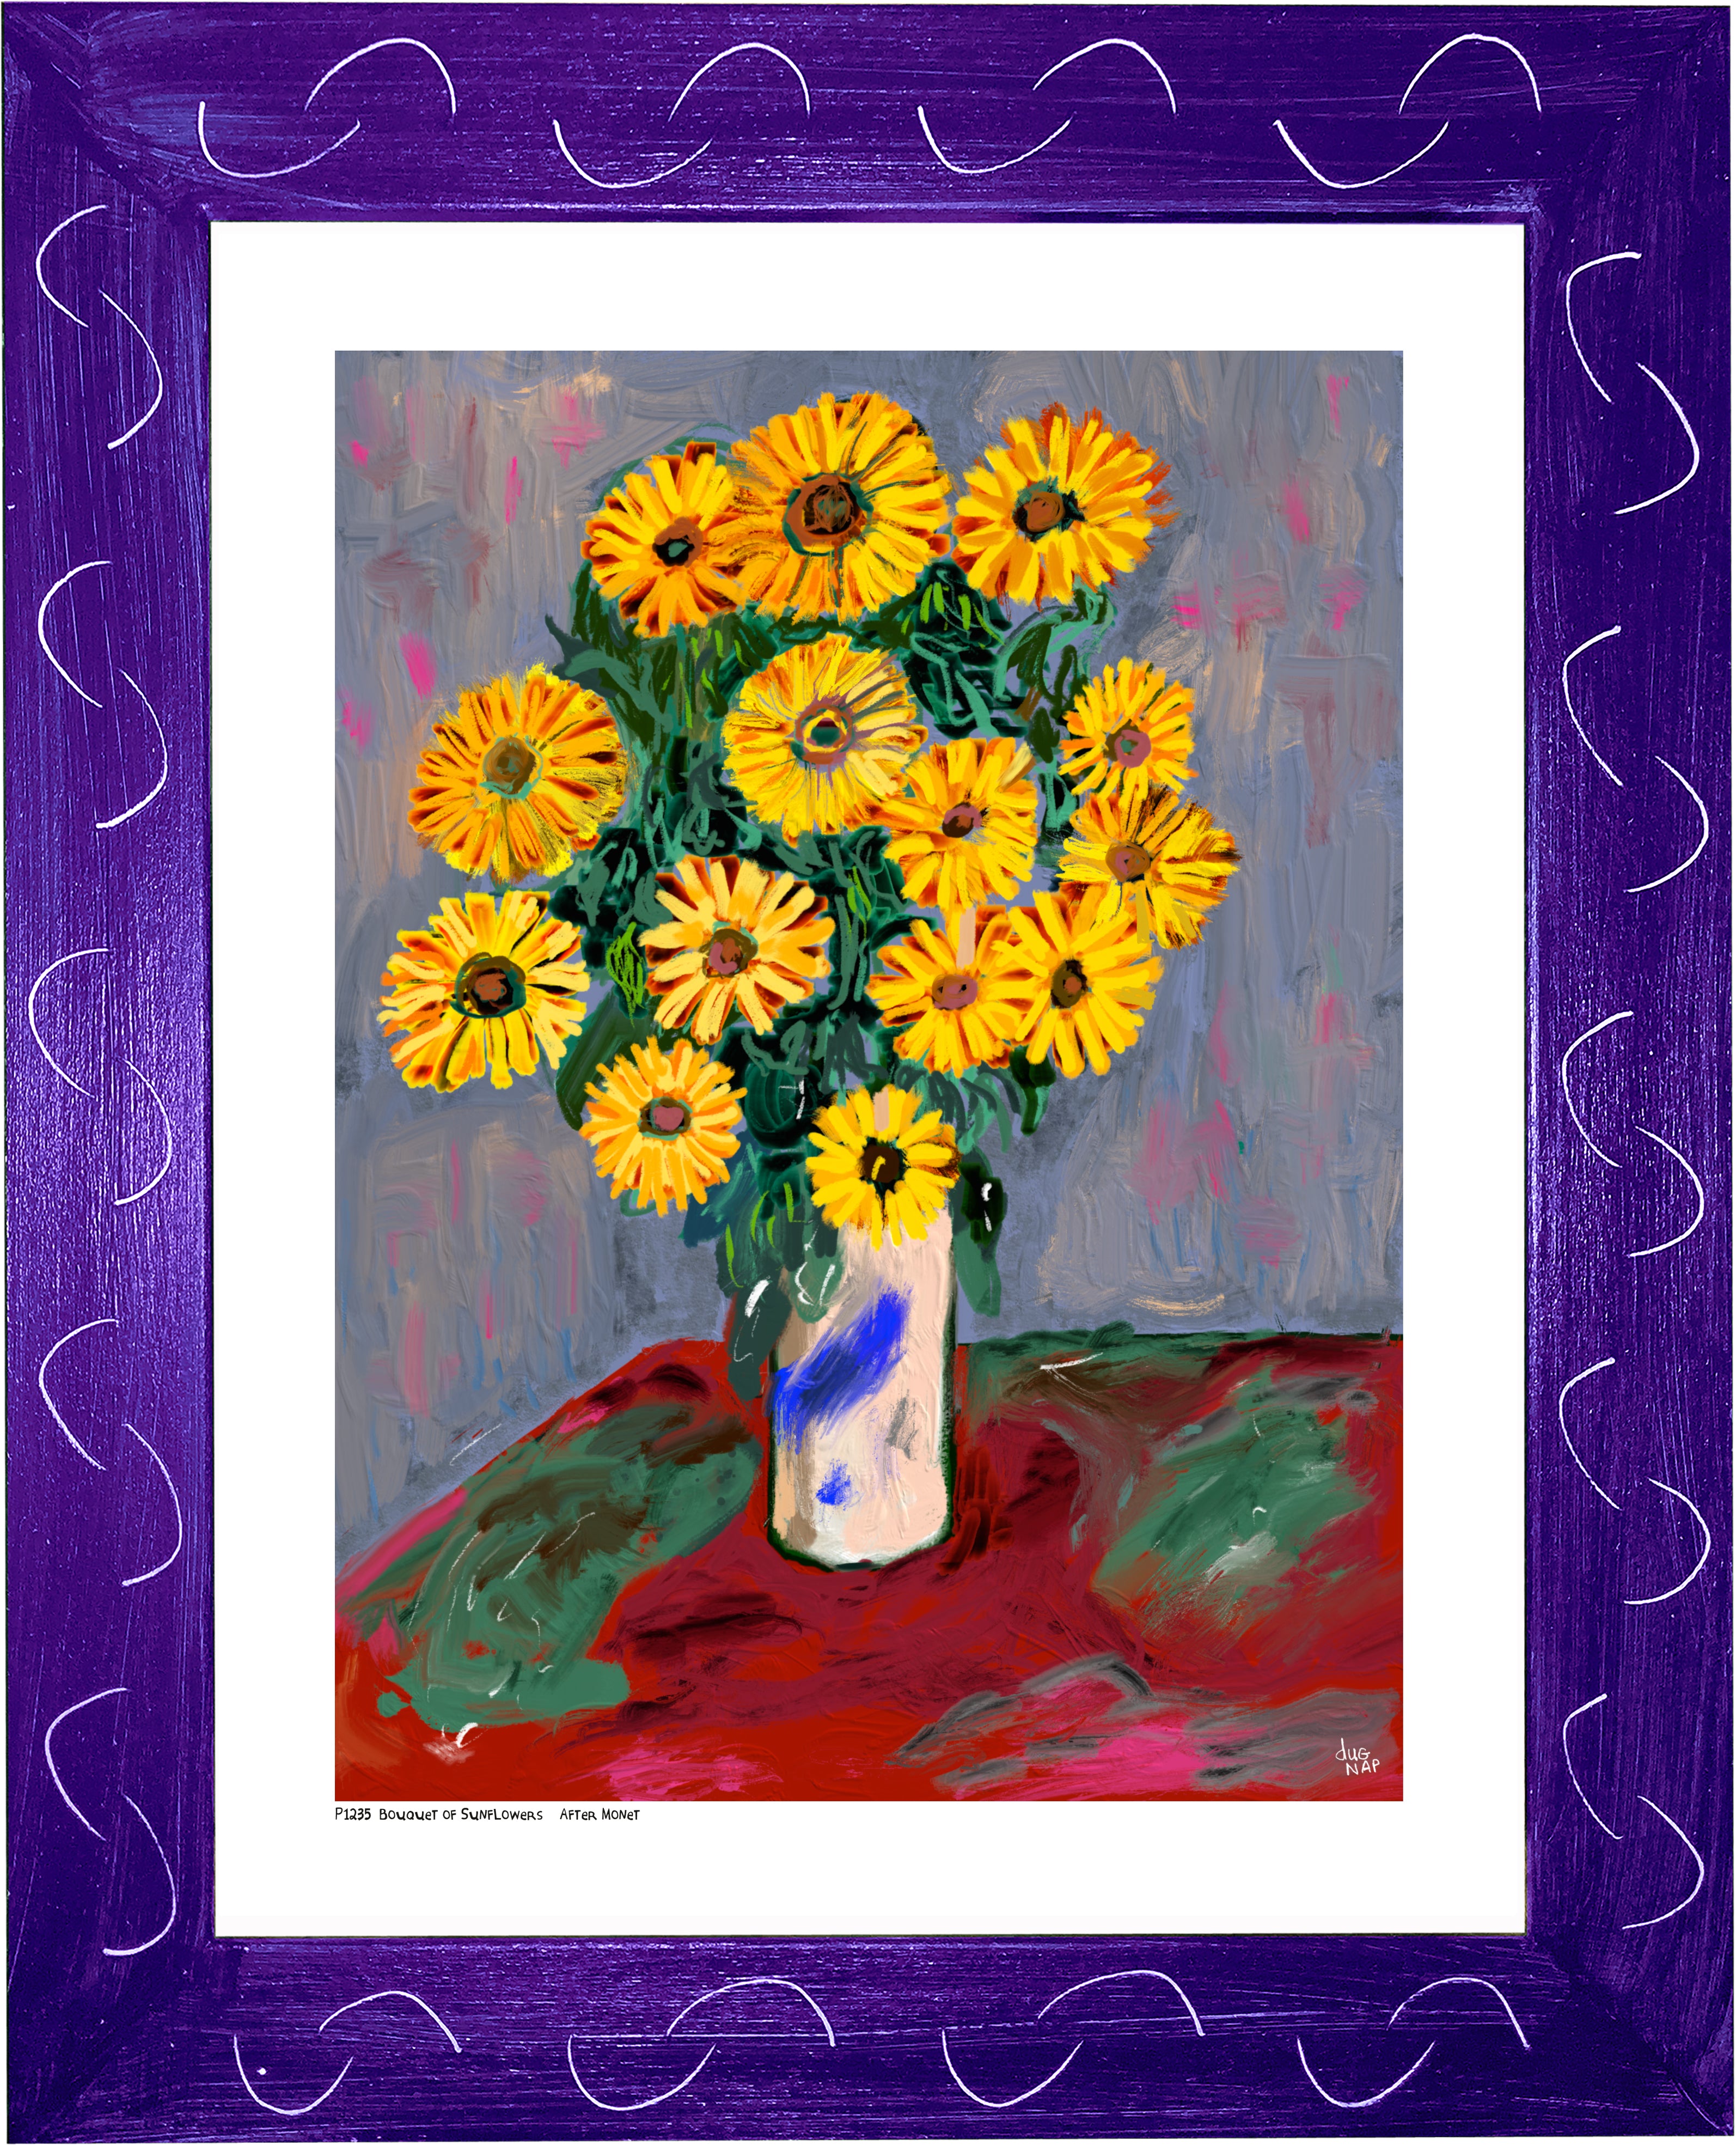 p1235 Bouquet of Sunflowers